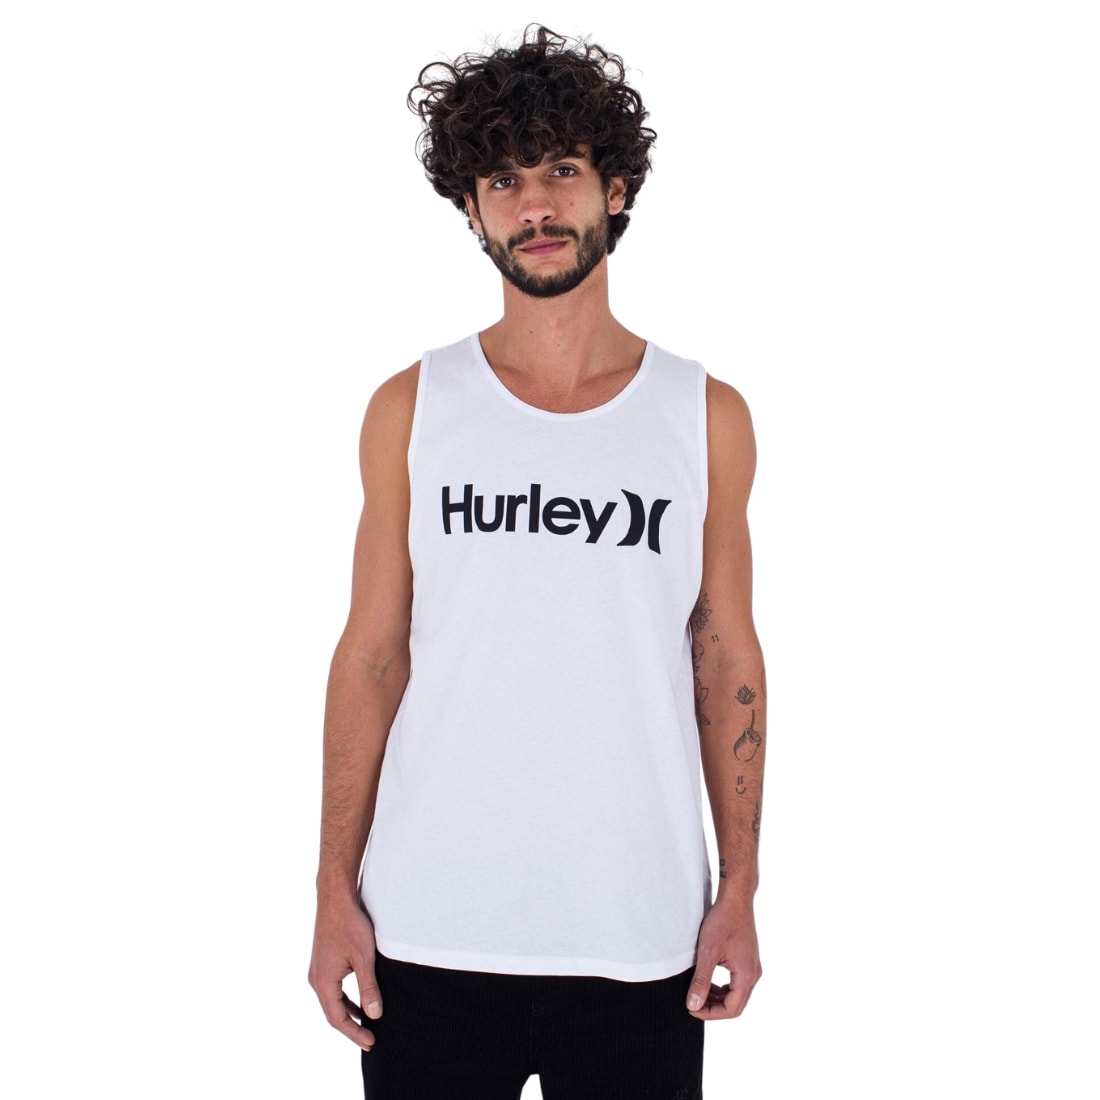 Hurley Everyday One & Only Solid Tank Top Vest - White - Mens Surf Brand Vest/Tank Top by Hurley